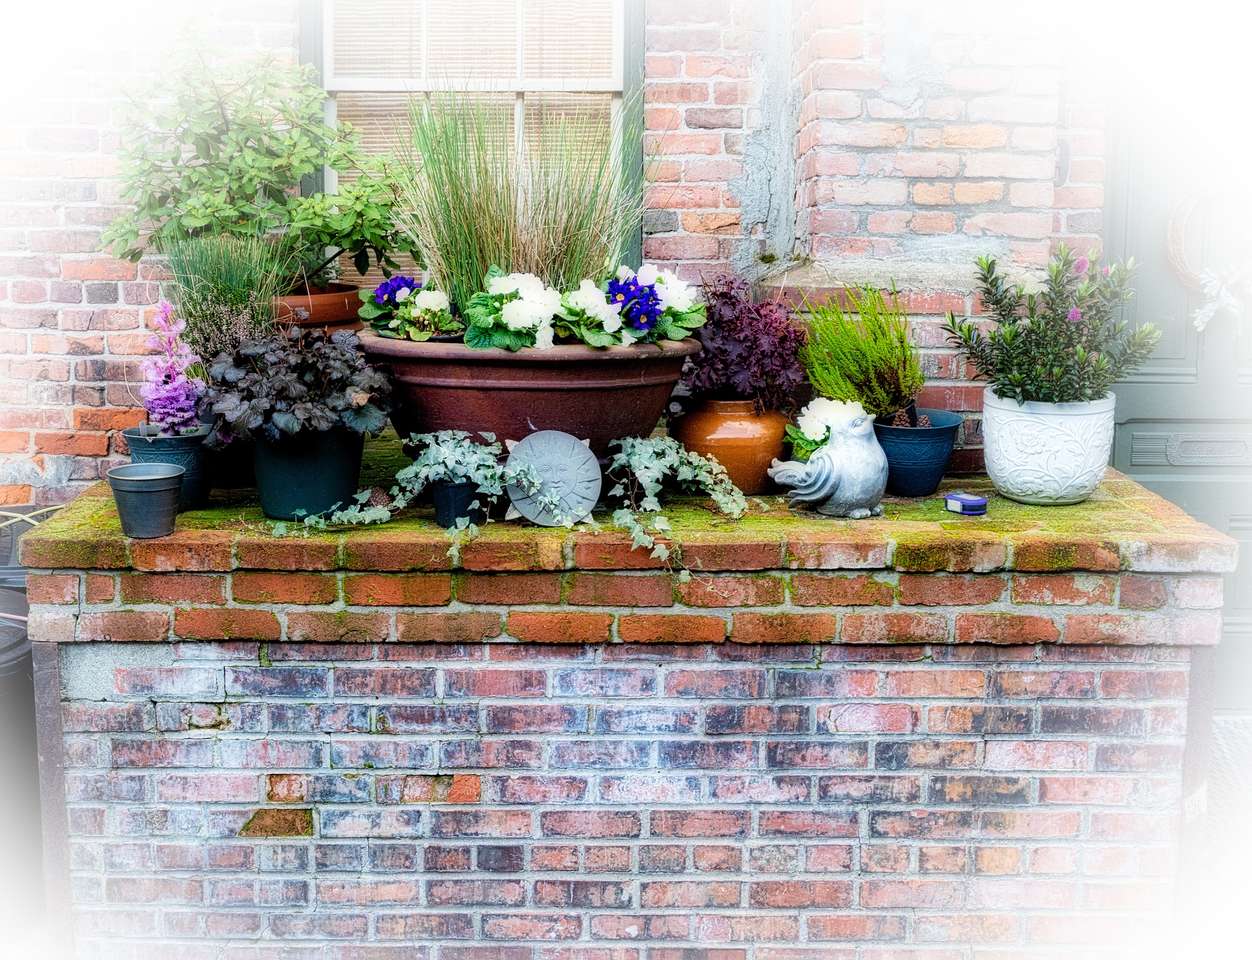 Pots with plants jigsaw puzzle online